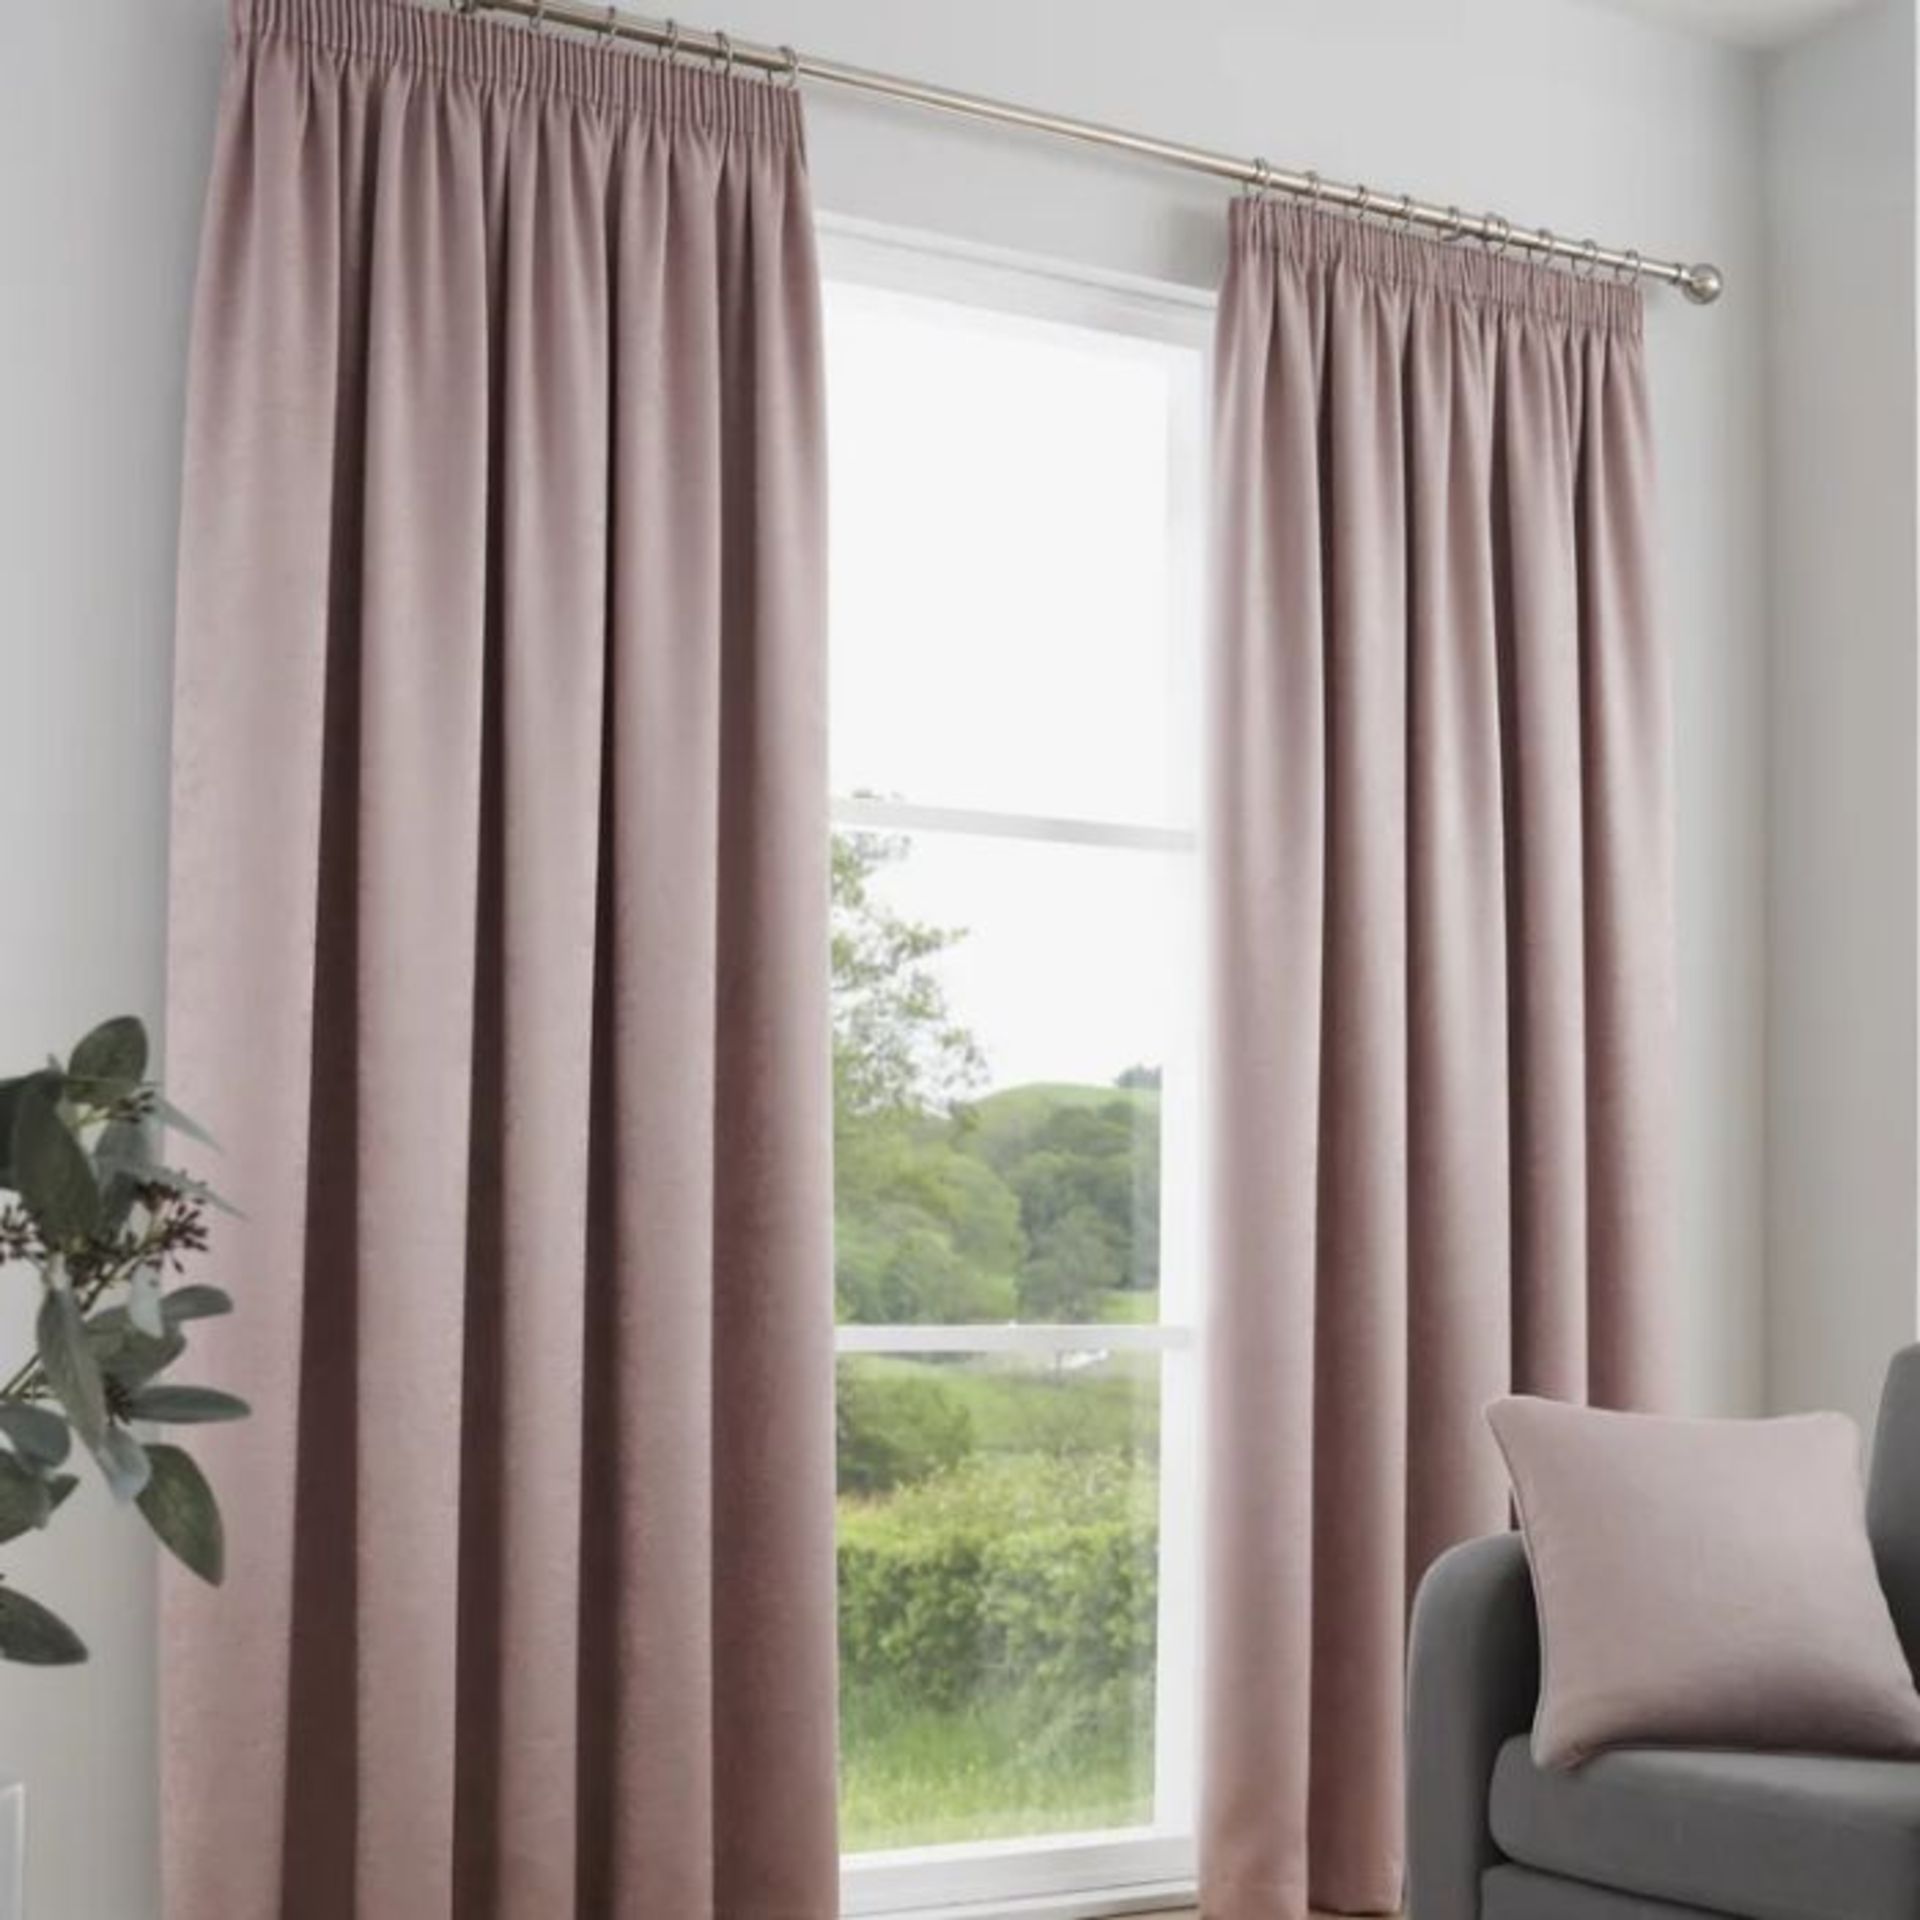 Ebern Designs, Carianna Self Lined Pair Of Eyelet Curtains By Ebern Designs (BLUSH) (168 W x 137 D - Image 3 of 4